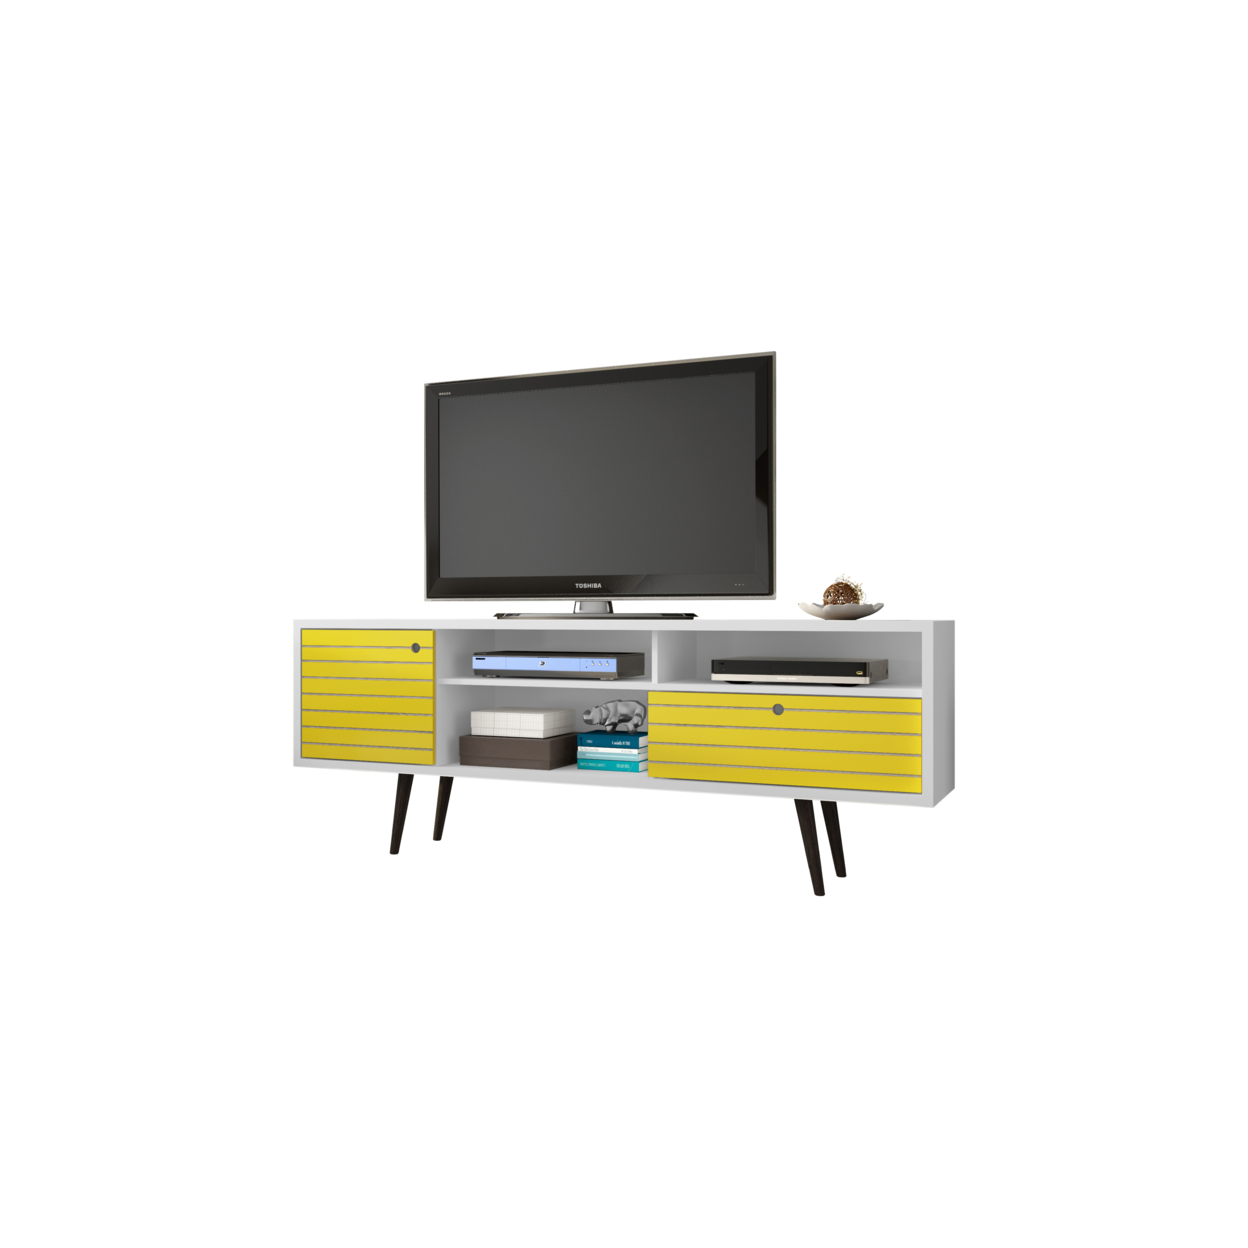 70.86" Mid Century - Modern TV Stand with 4 Shelving Spaces & 1 Drawer, (MHC-202AMC64)